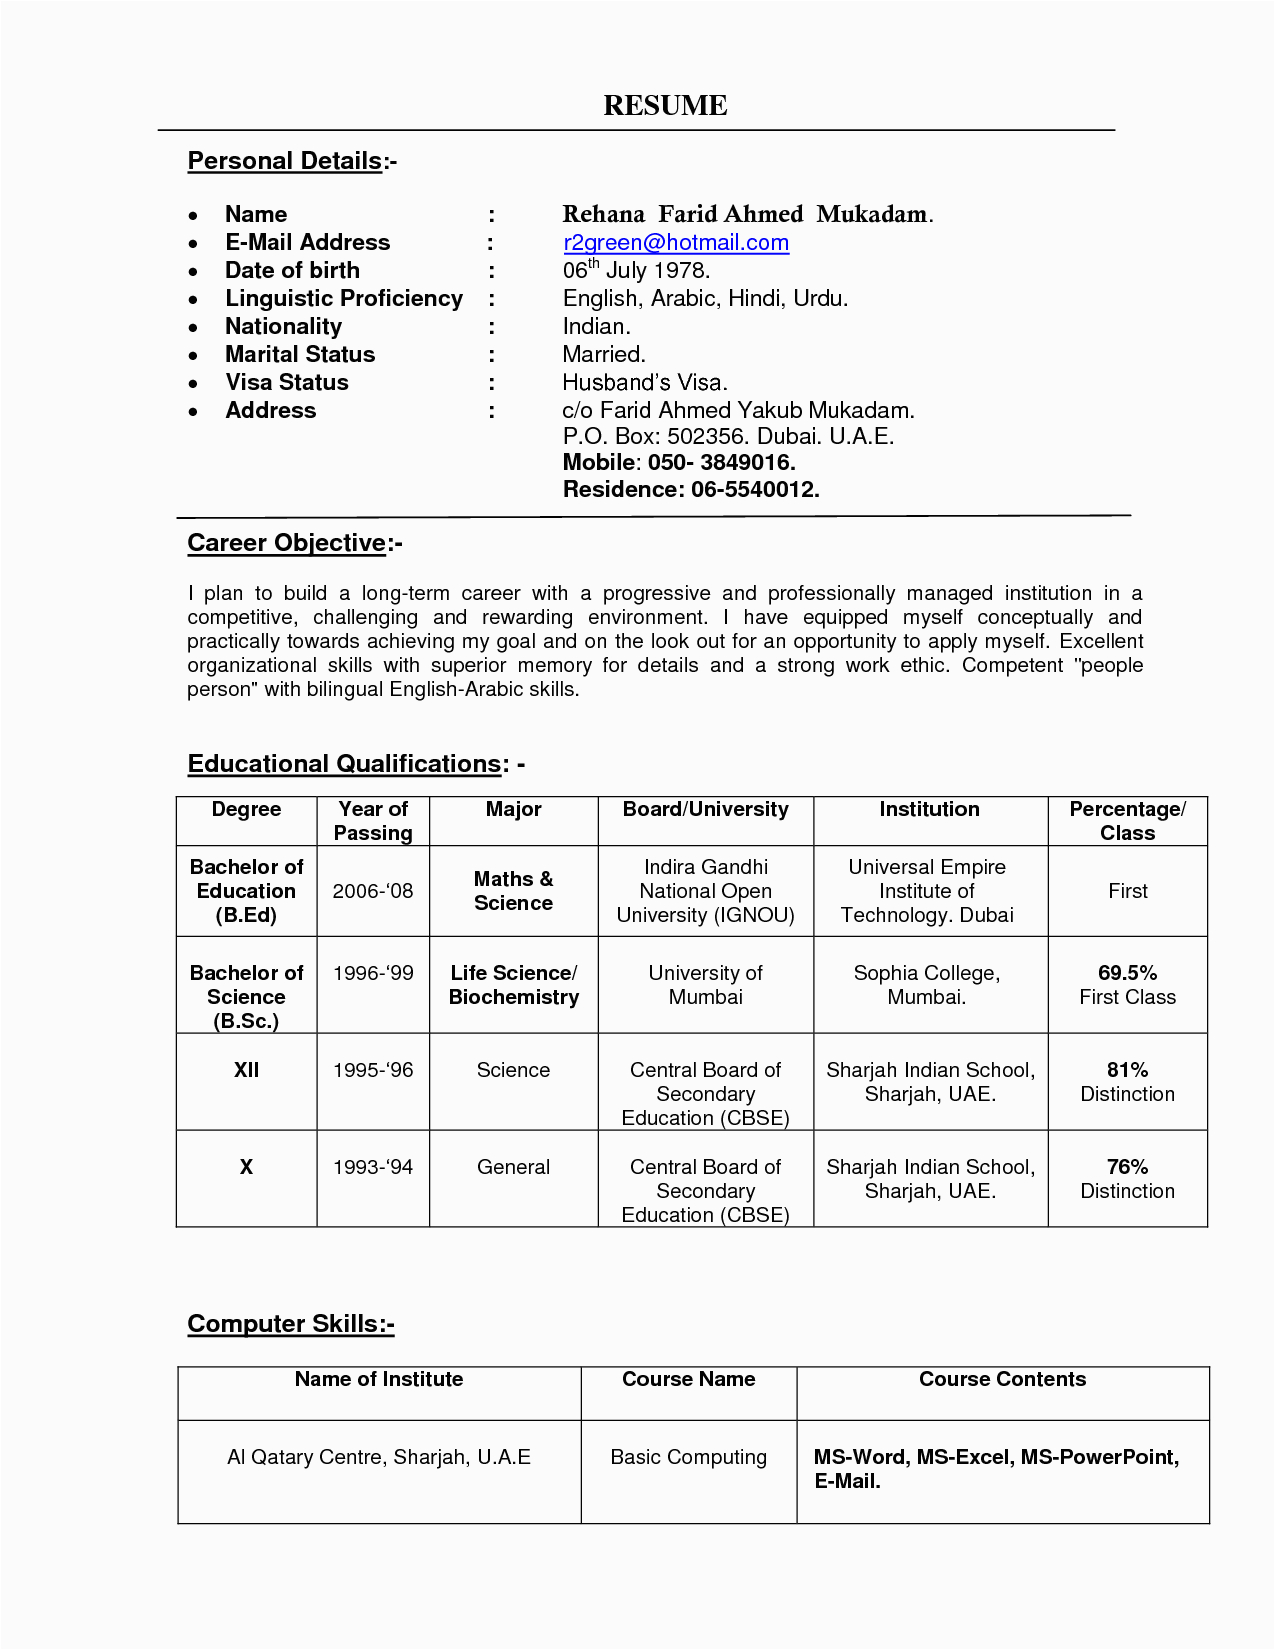 Sample Resume for Principal In India School Teacher Resumes In India Yahoo Search Results Yahoo India